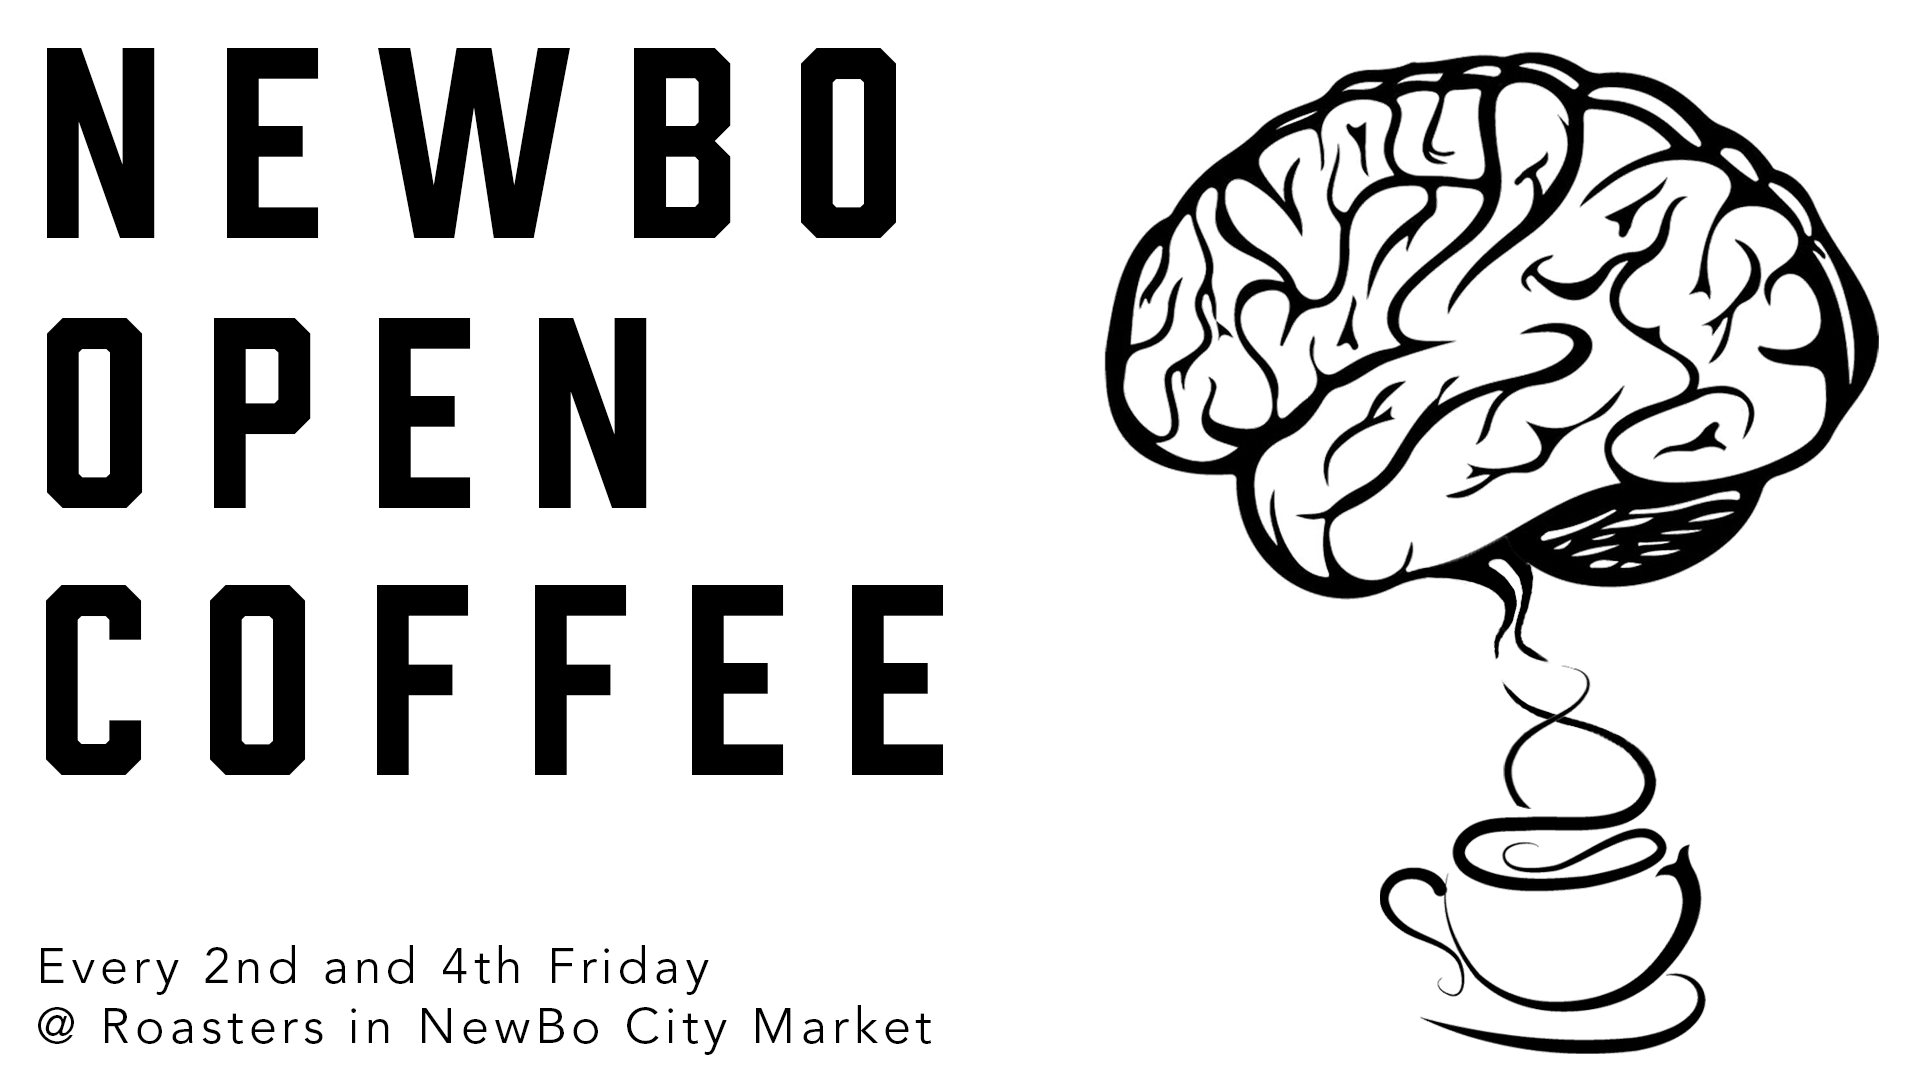 Newbo Open Coffee - Every 2nd and 4th Friday at Roasters in NewBo City Market